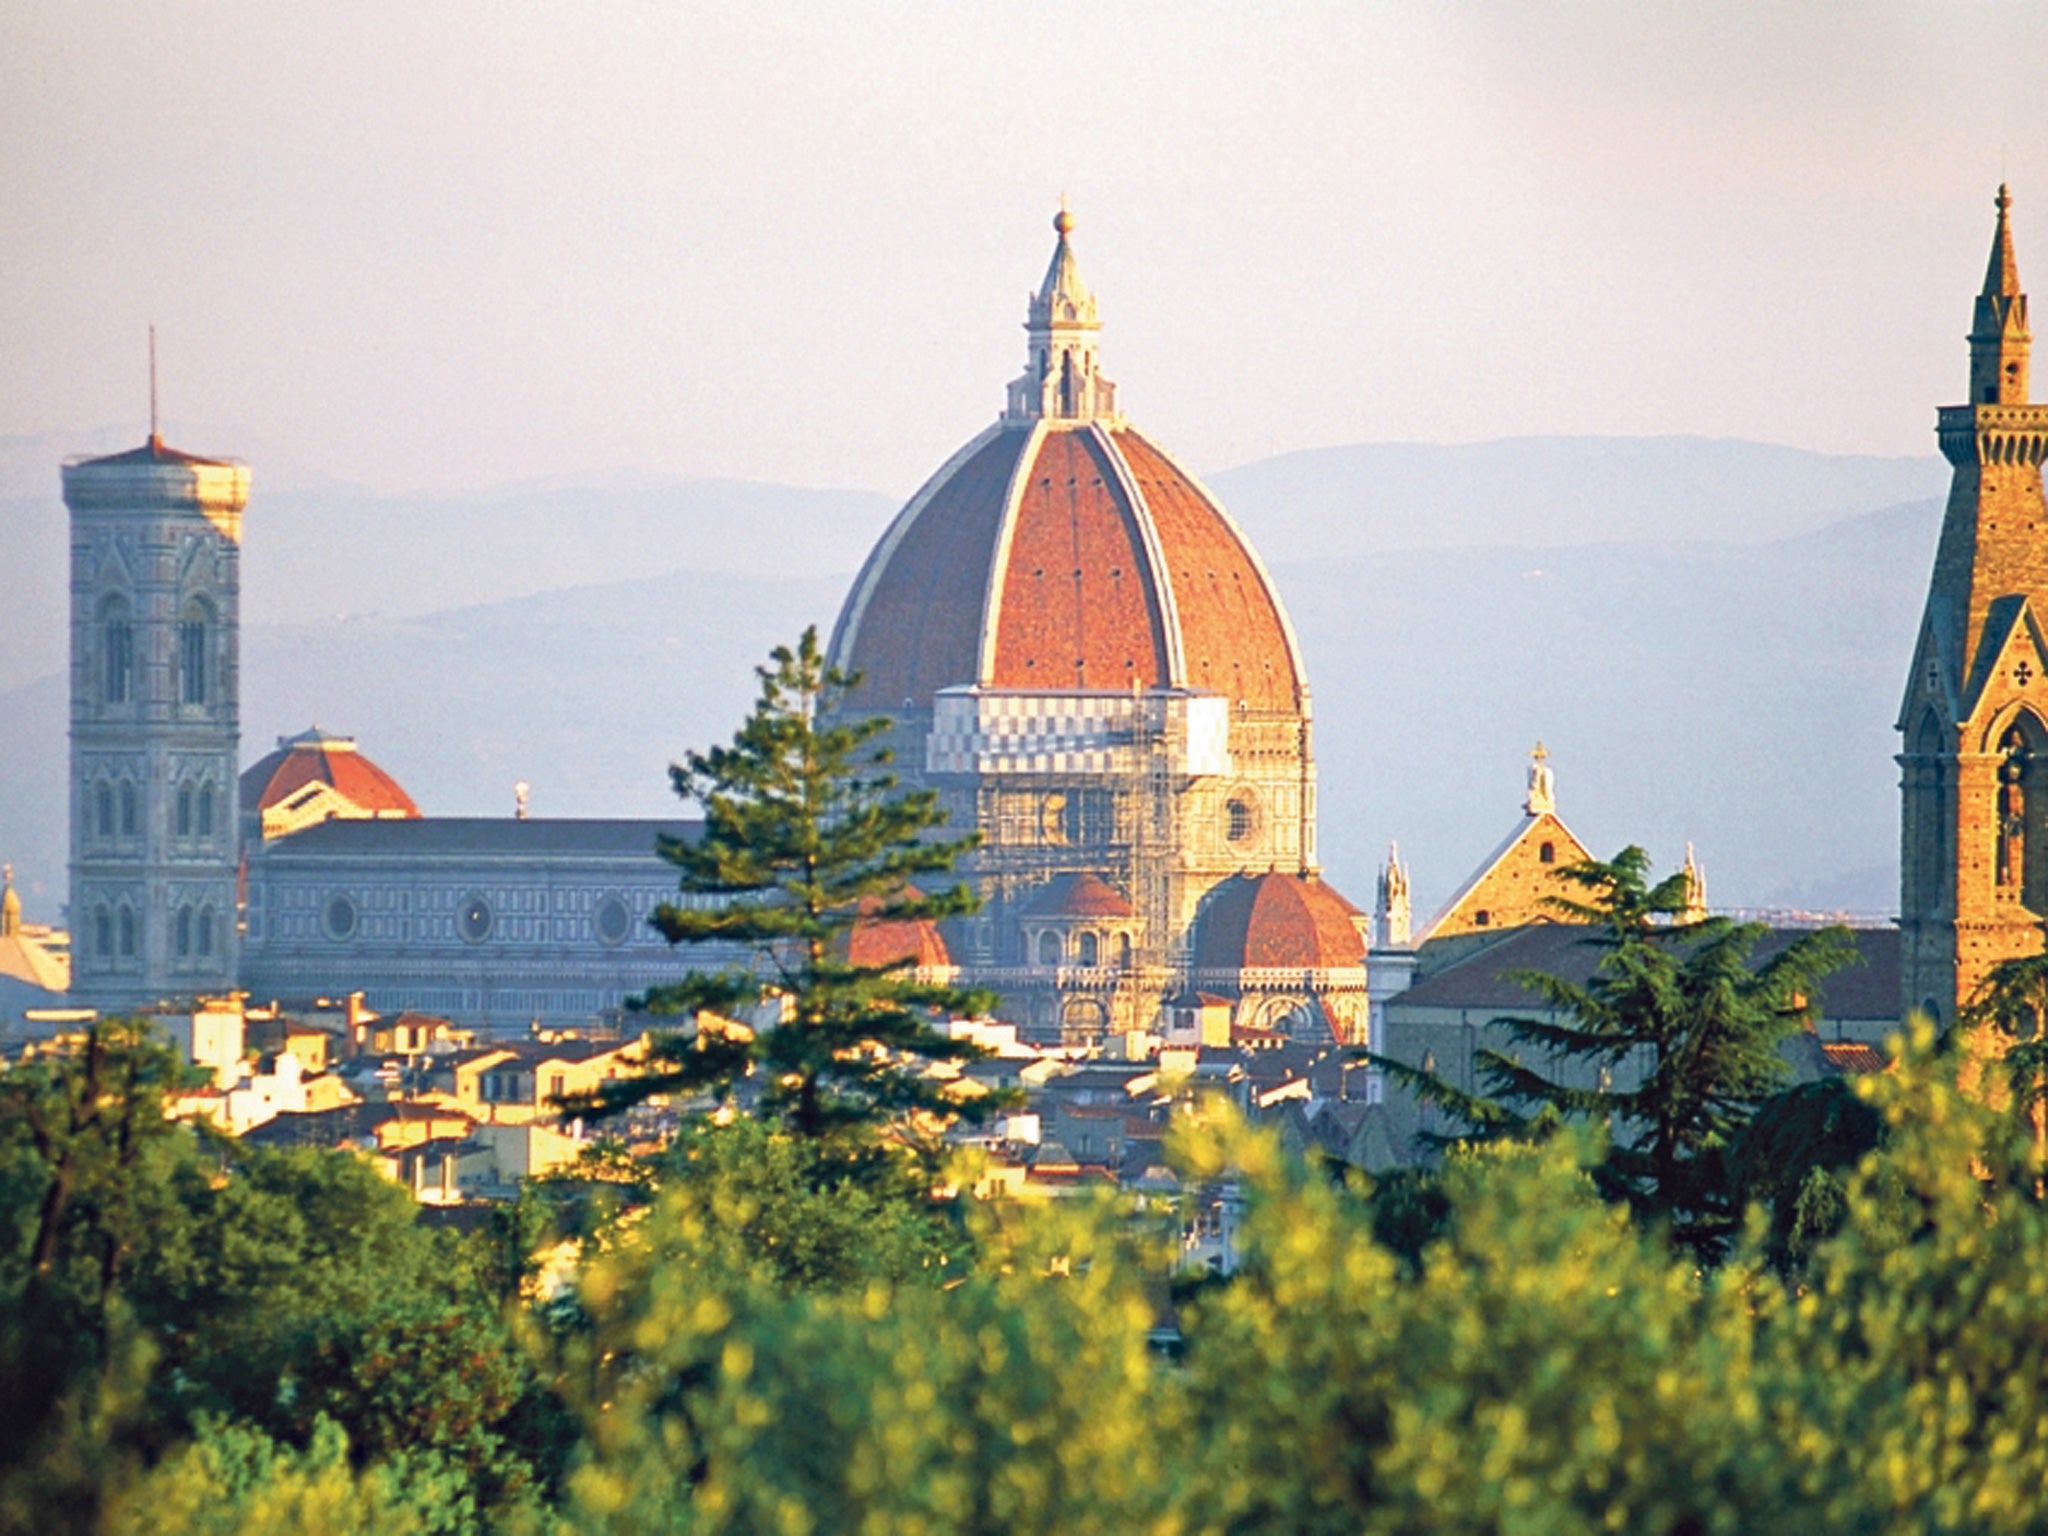 Grand design: the Duomo, Florence's stately cathedral